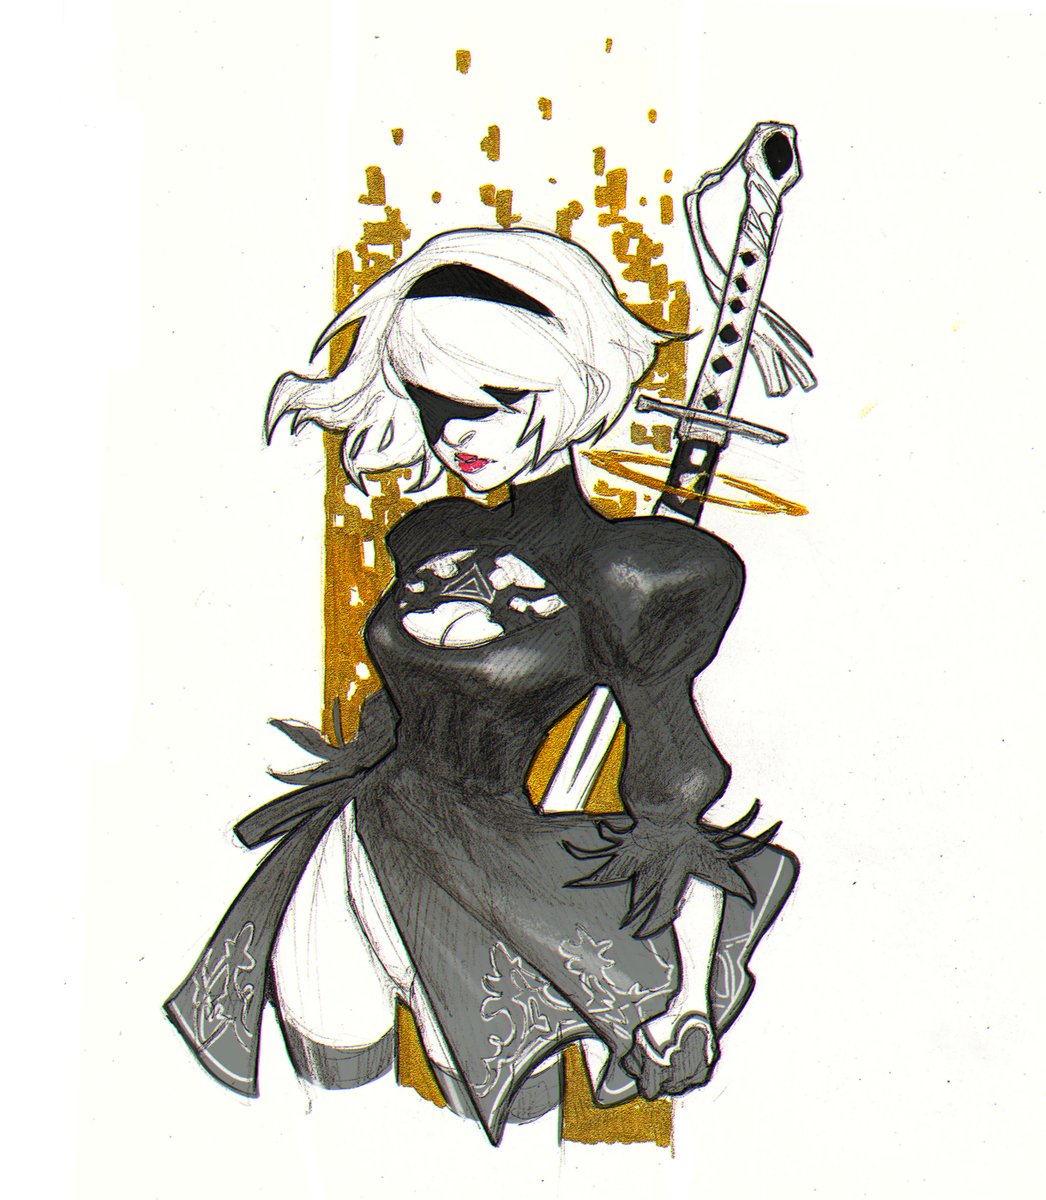 I've found an old 2b sketch from #NieRAutomata and decided to add a bit of grey 🧊